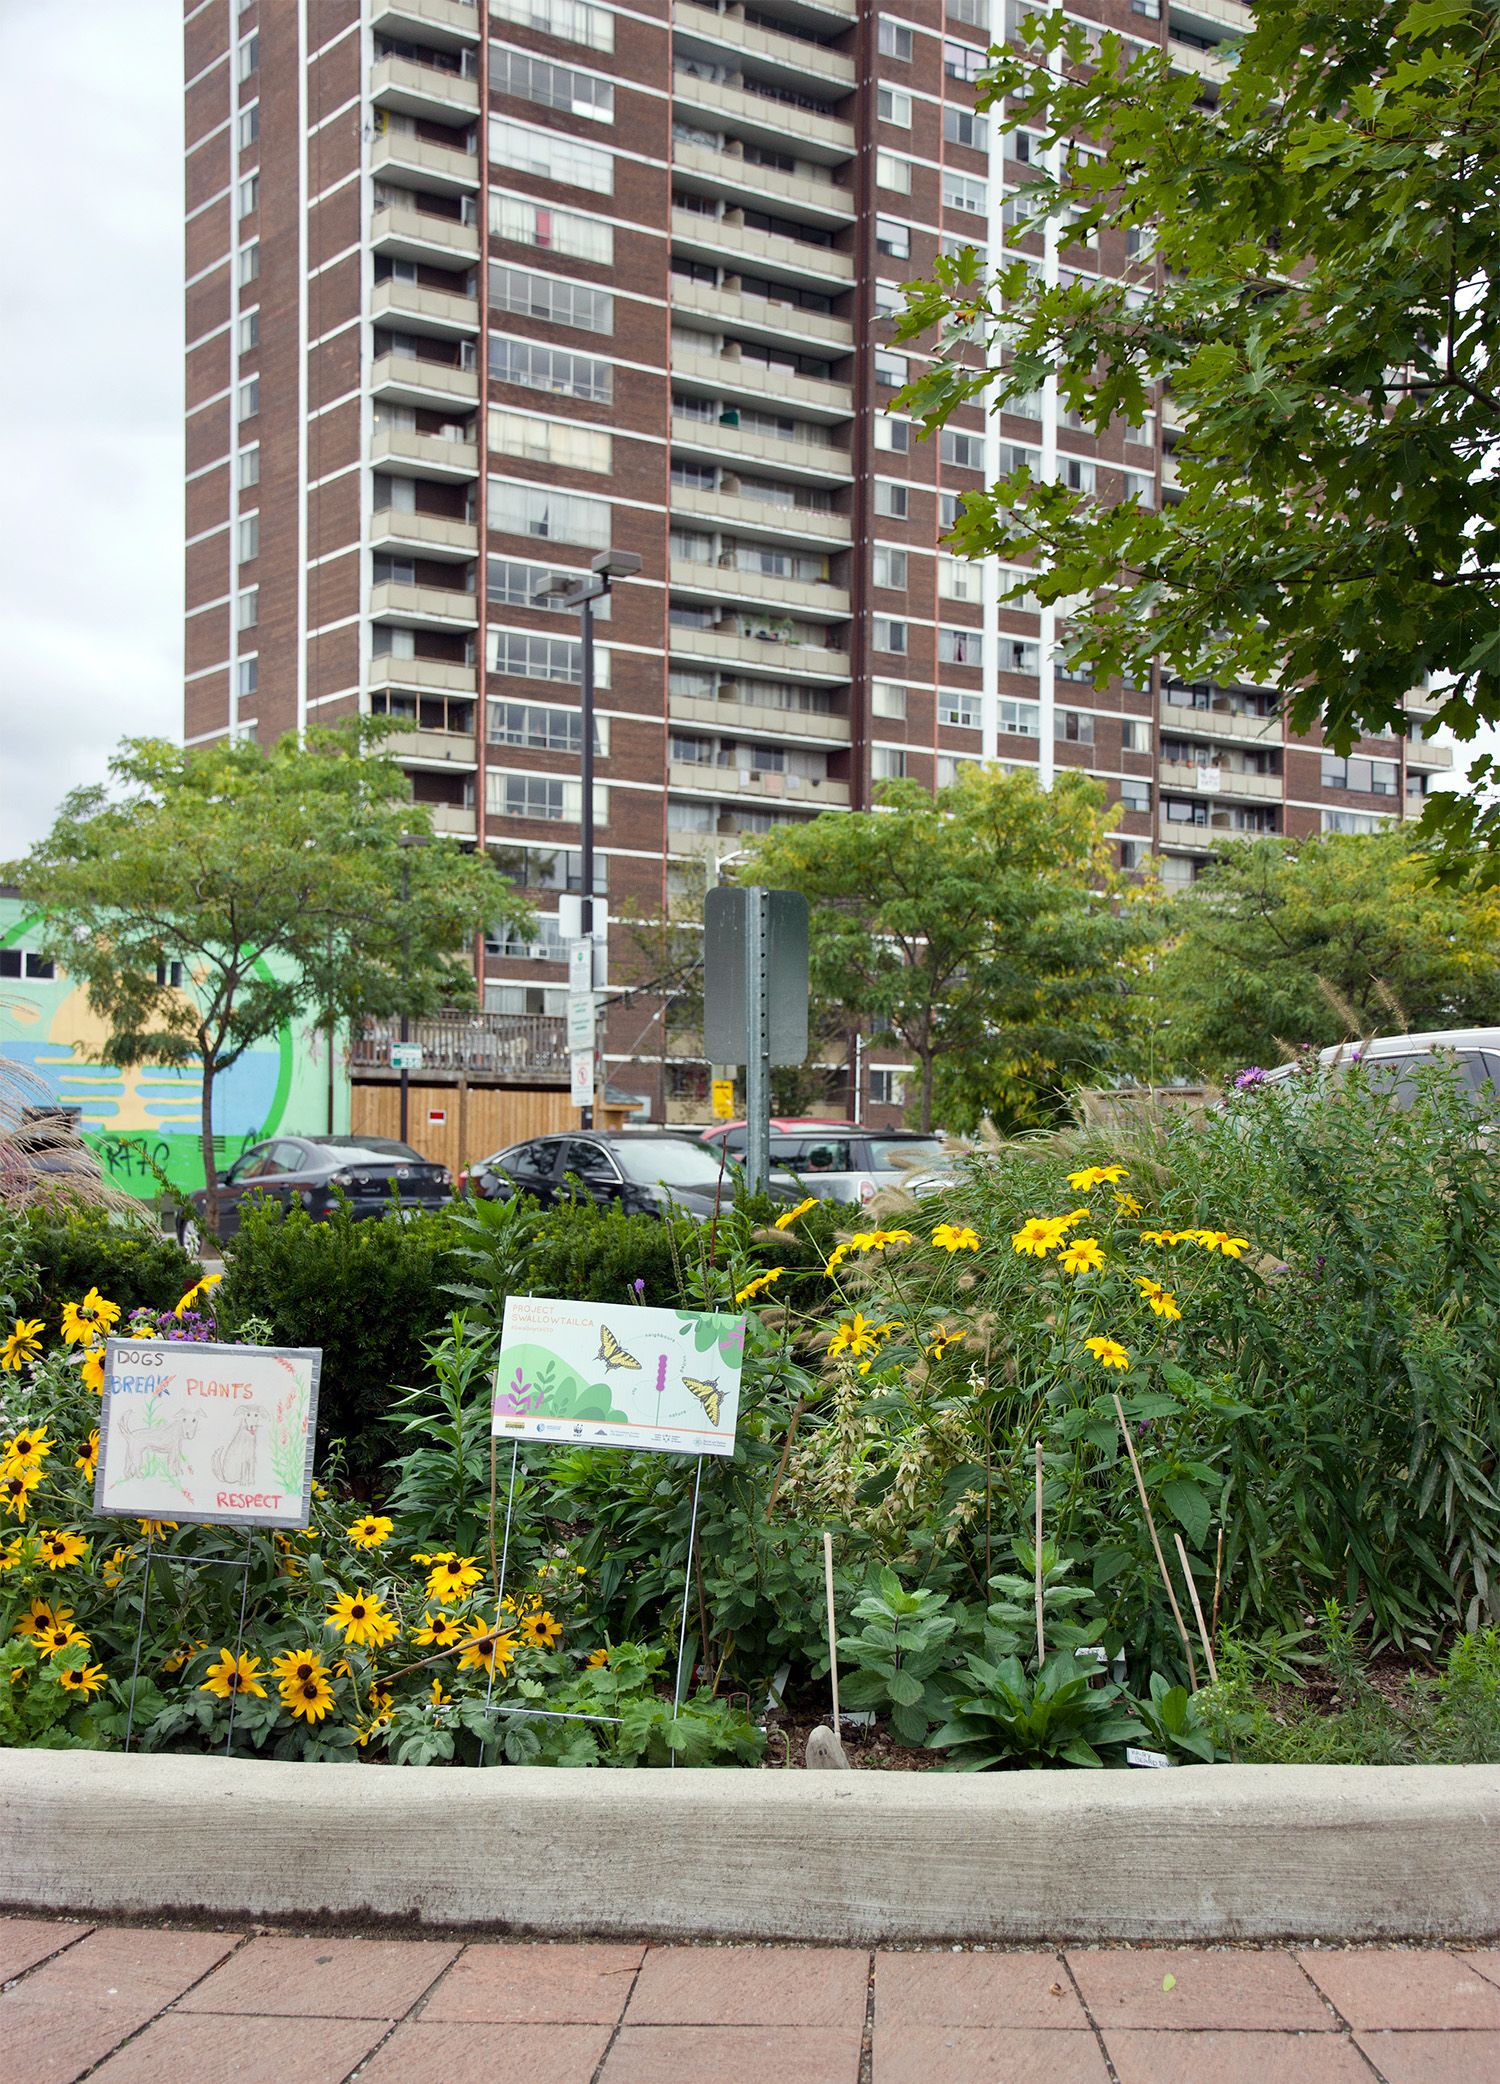 A sidewalk-side garden with yellow flowers and a Project Swallowtail sign. In the background, cars in a parking lot and a tall apartment building are visible.